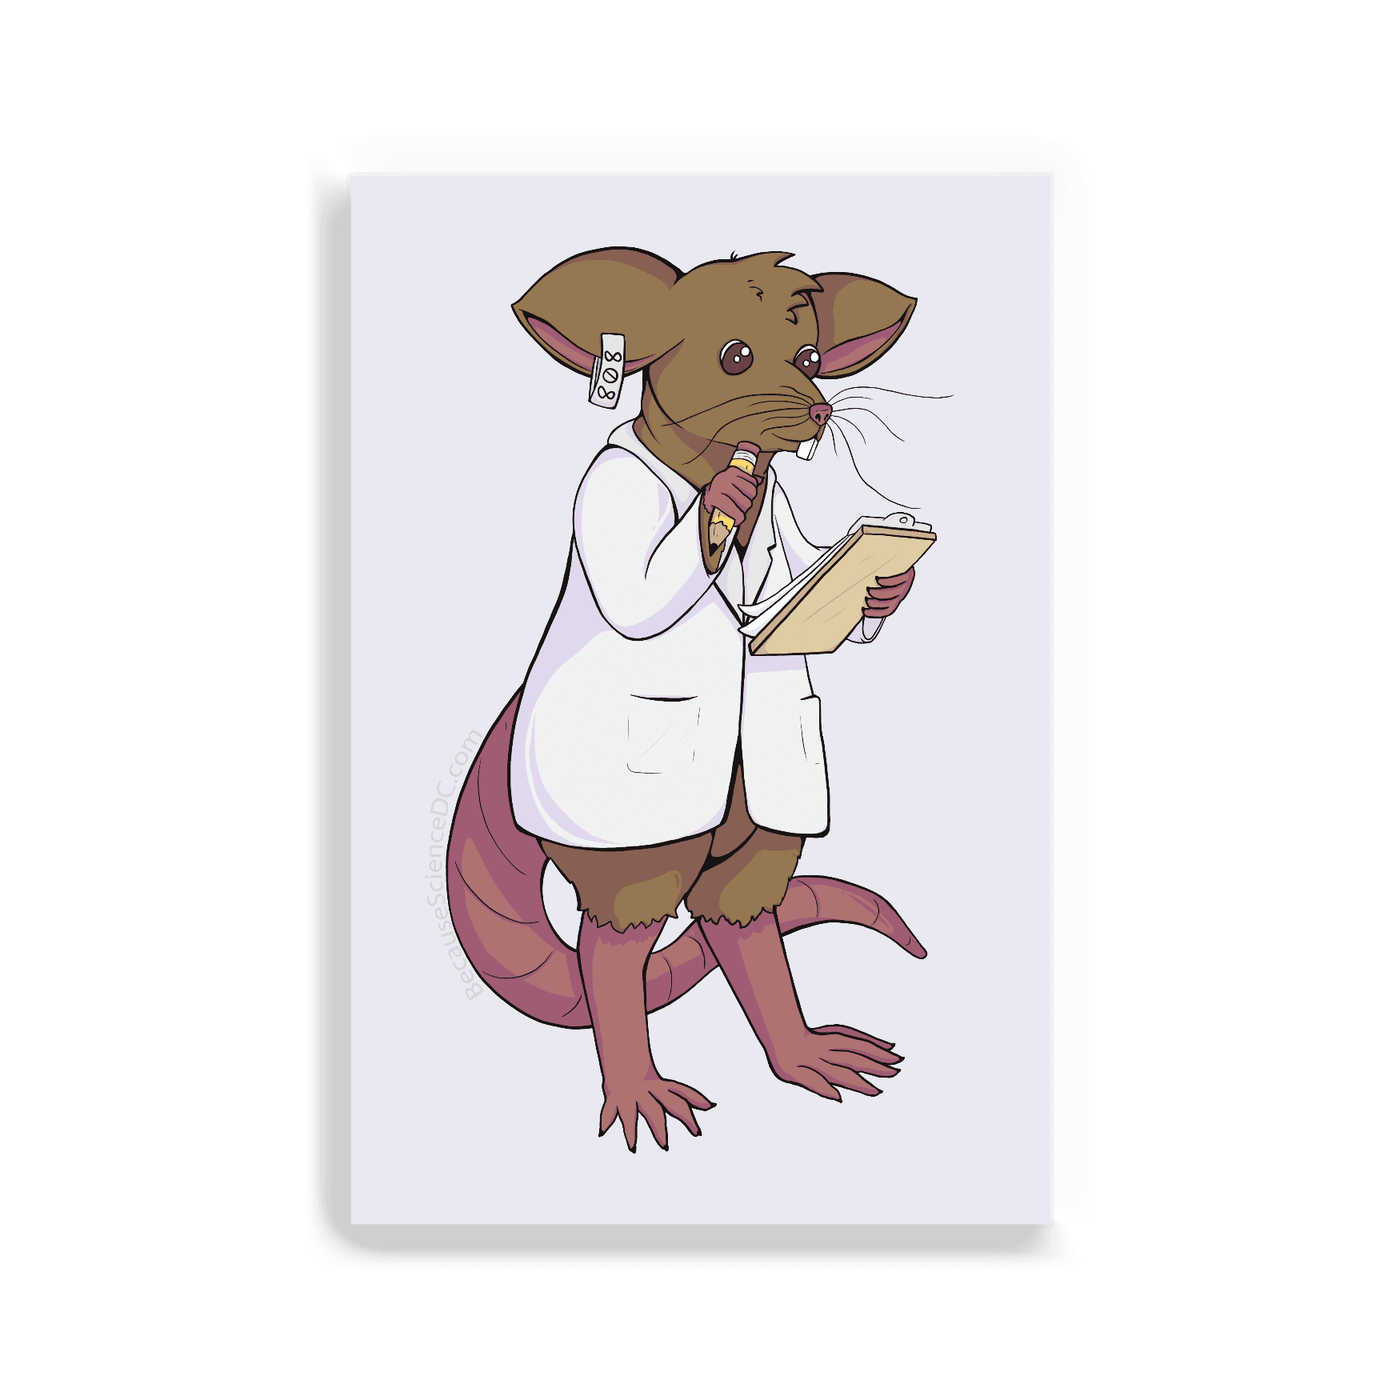 2x3 colorful magnet with image of a rat wearing a lab coat